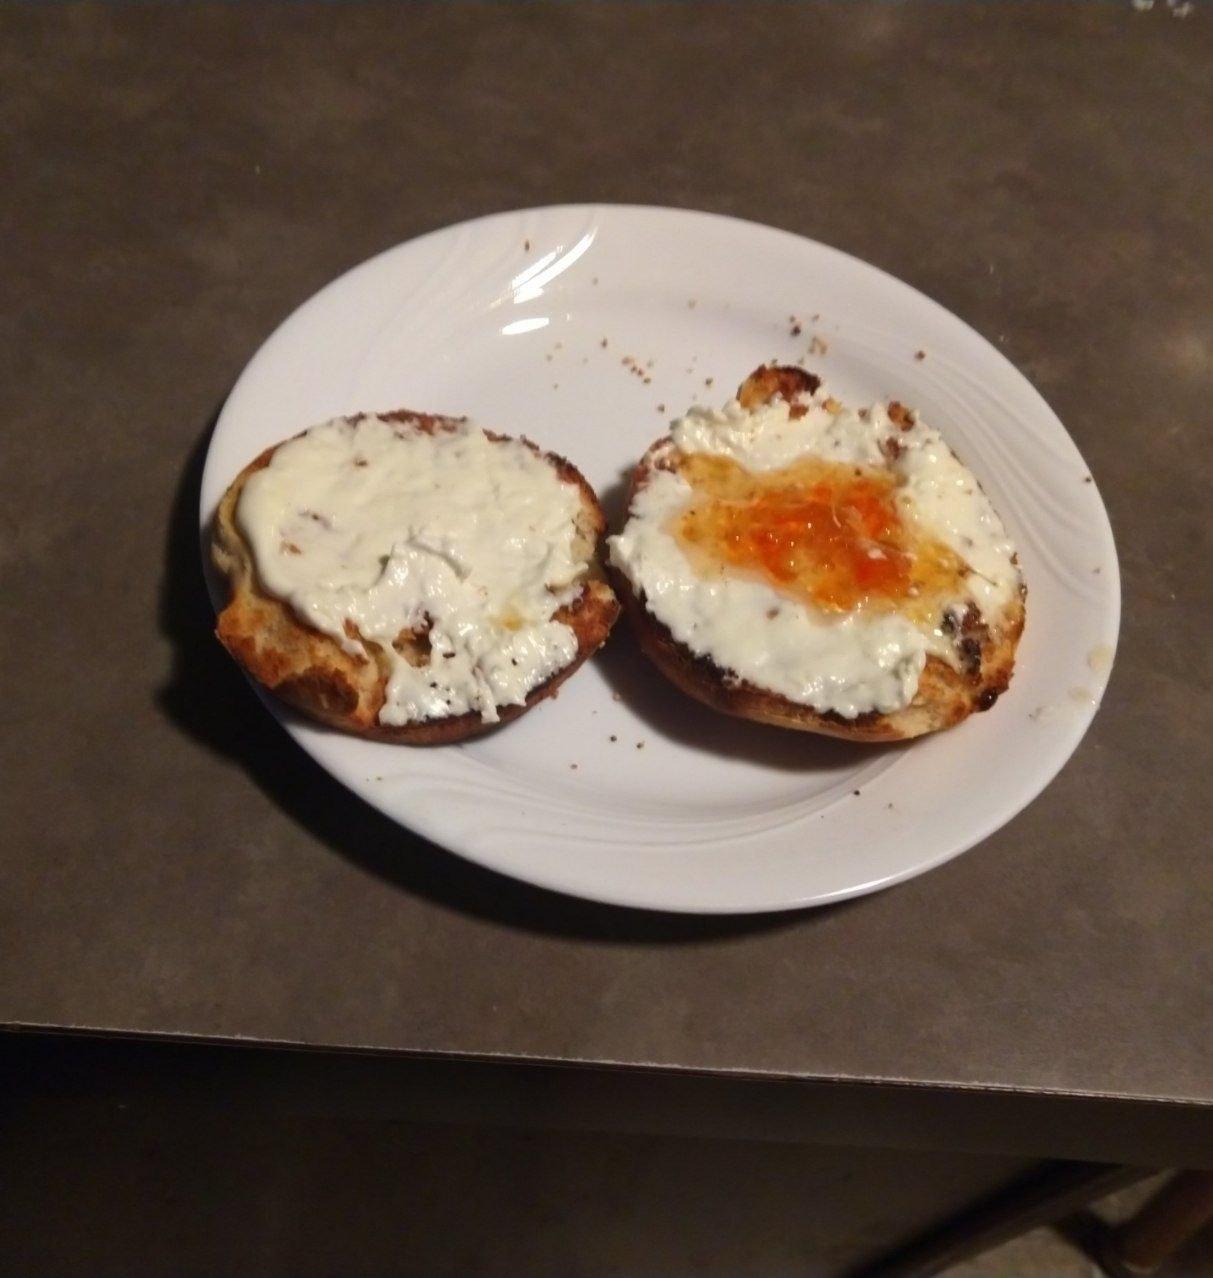 Toasted english muffin with habanero jam and cream cheese.